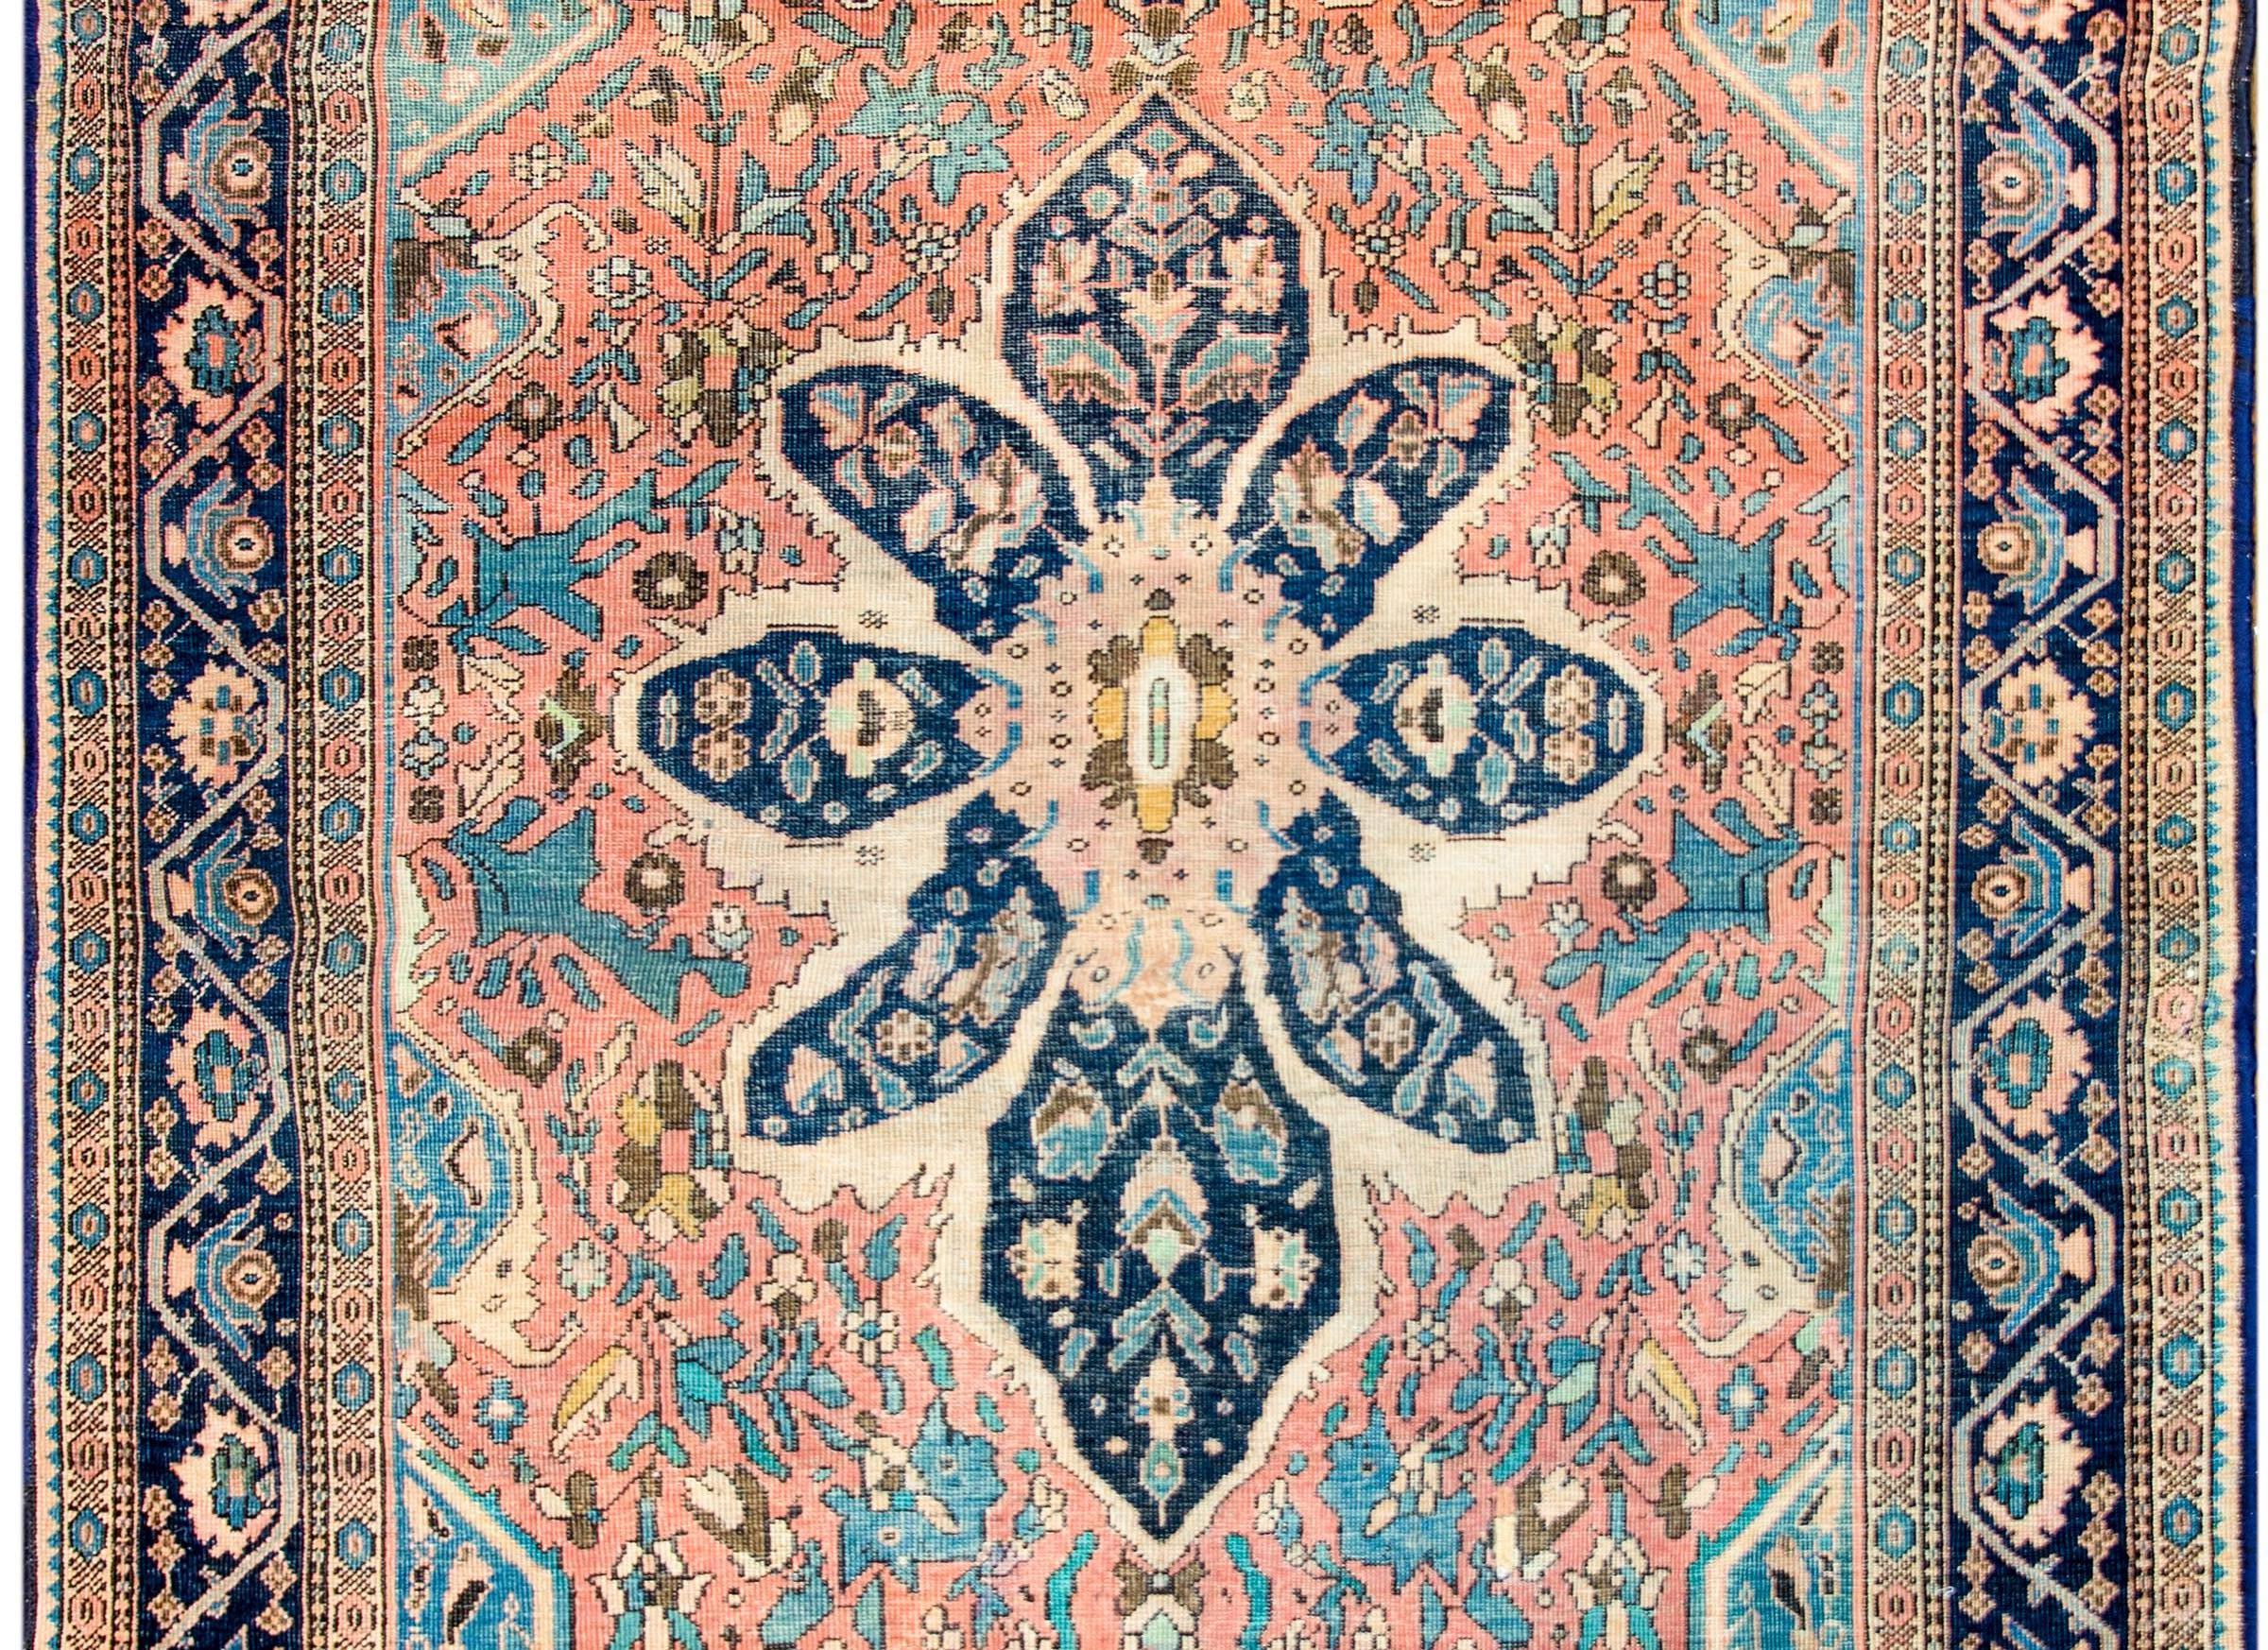 An exquisite late 19th century Persian Sarouk Farahan rug with an expertly rendered asymmetrical central floral medallion containing a pattern of leaves and flowers woven in light and dark indigo, salmon, and cream colored vegetable dyed wool. The